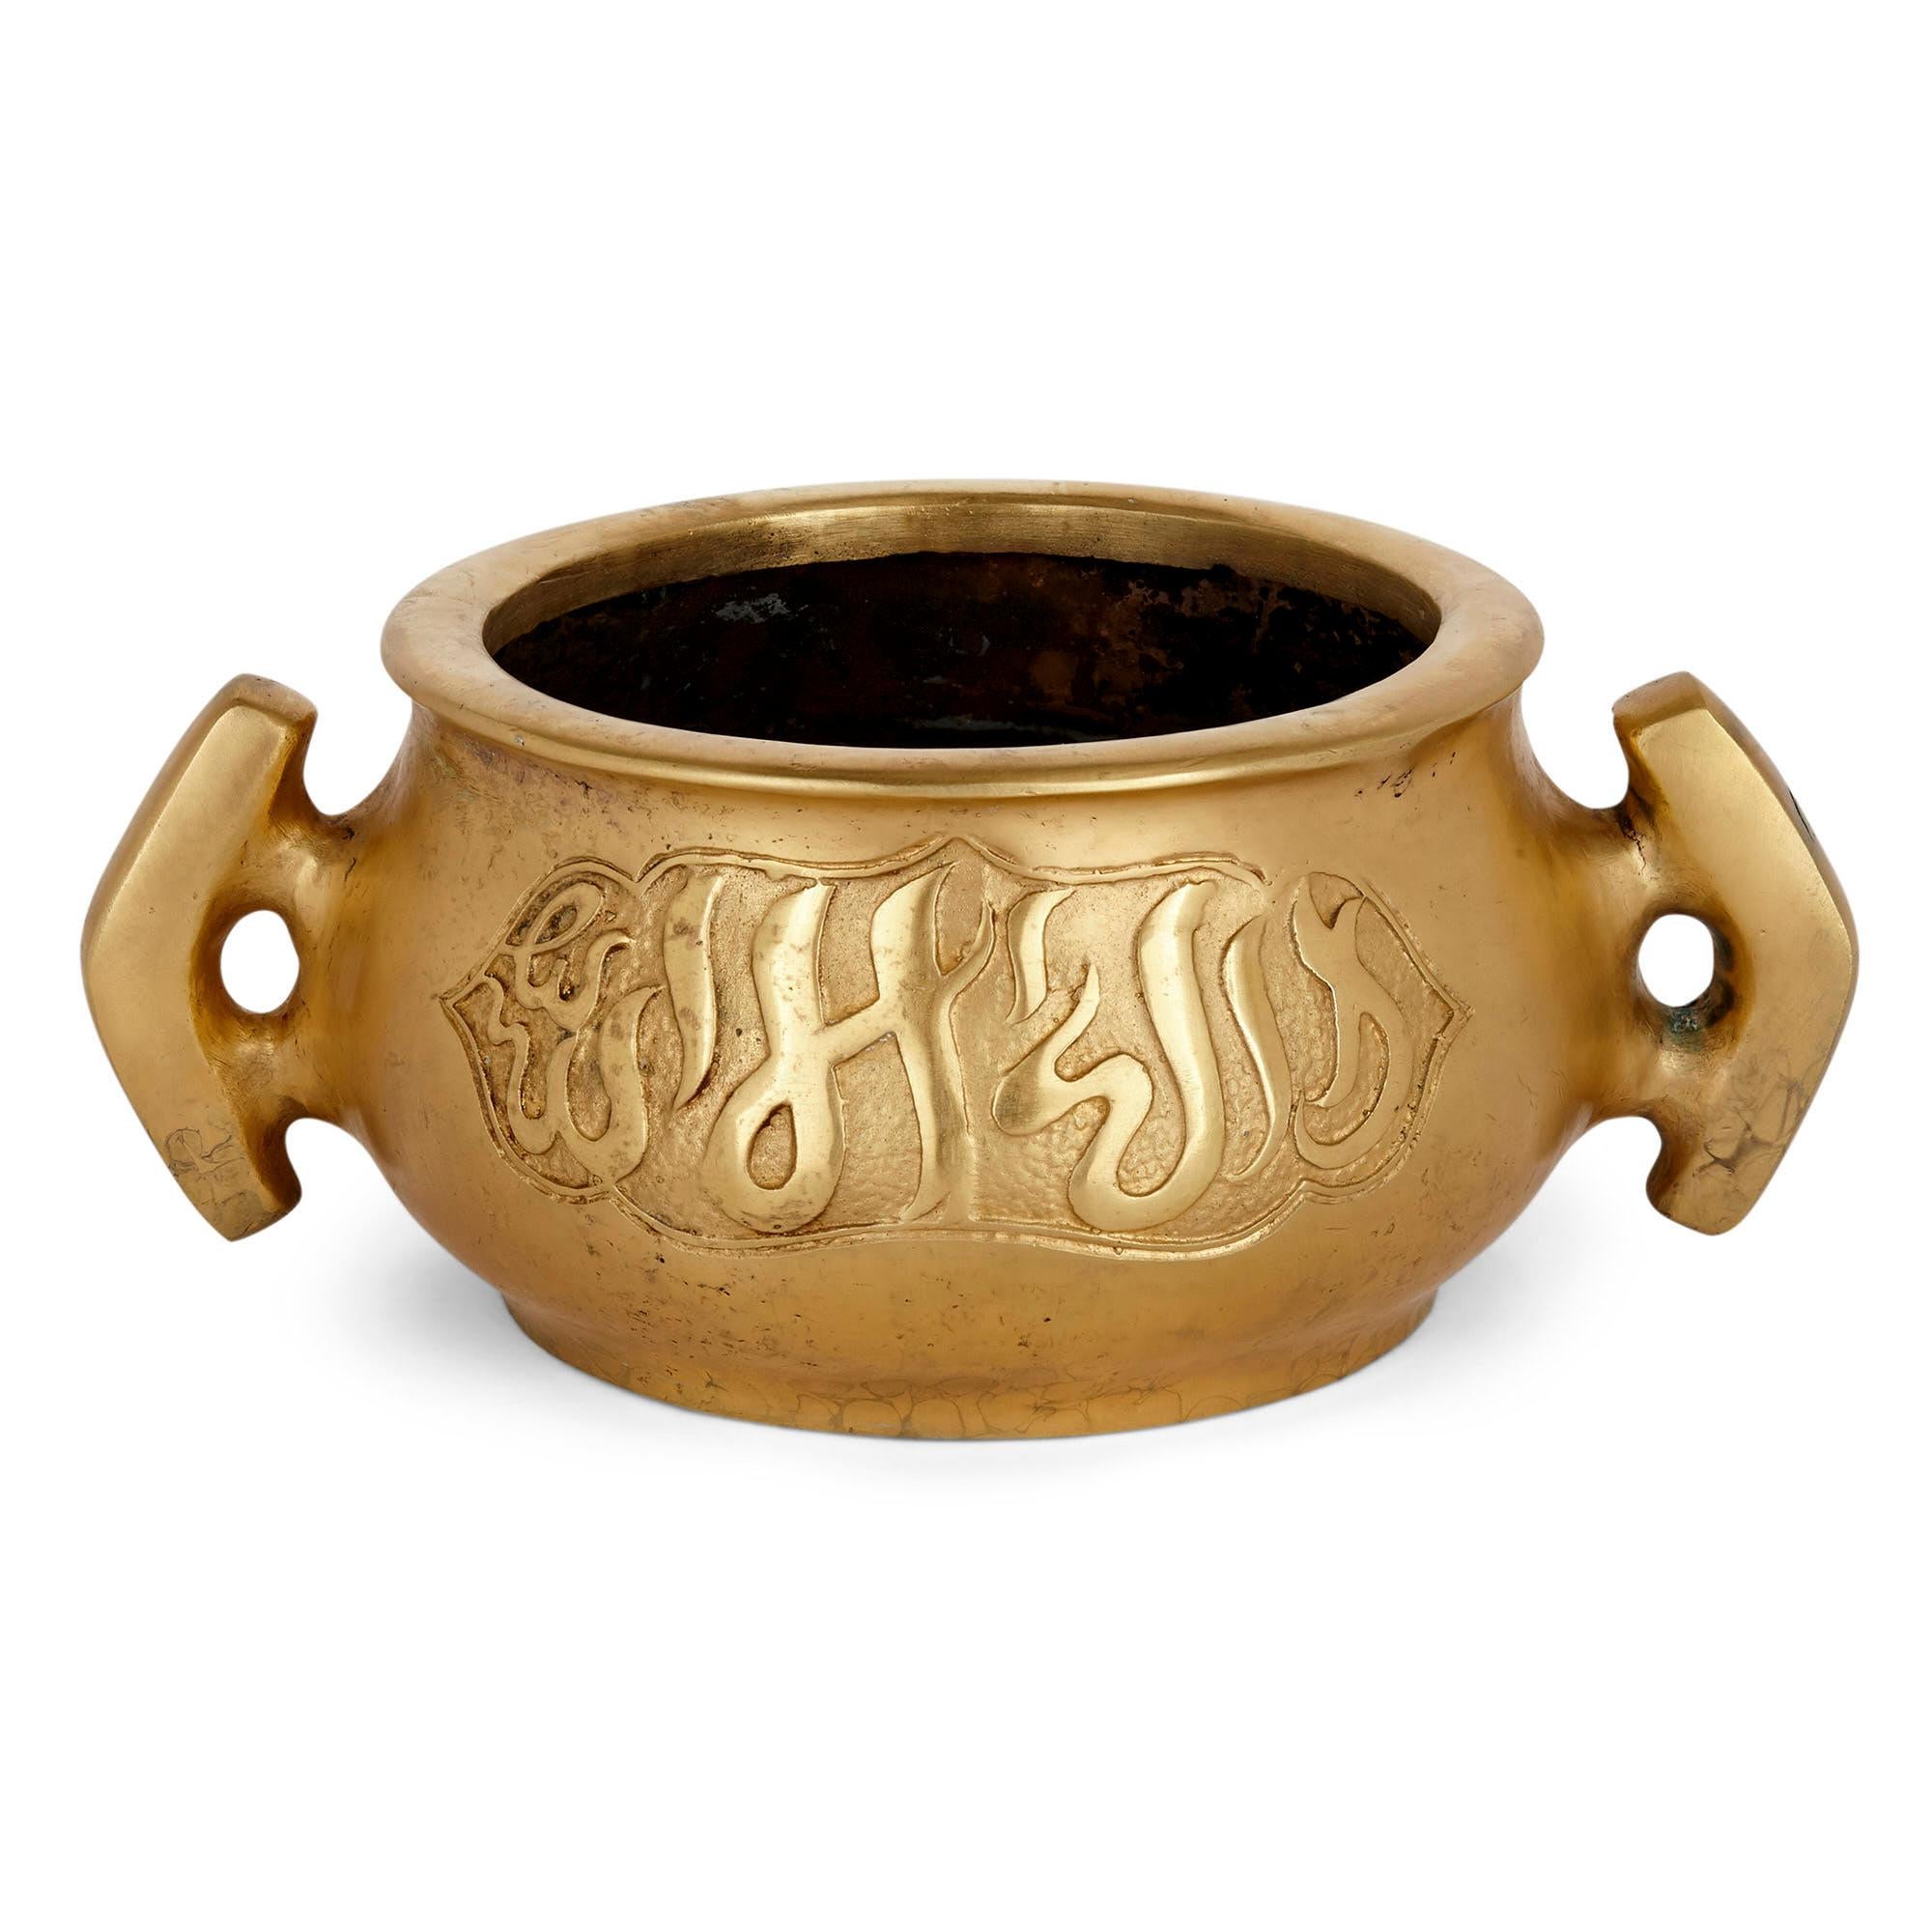 Antique Chinese ormolu bowl with Islamic Arabic inscriptions
Chinese, early 20th century
Measures: Height 13cm, diameter 31cm

This charming ormolu, or gilt bronze, bowl features a squat ovoid body with twin handles mounted to the sides. The